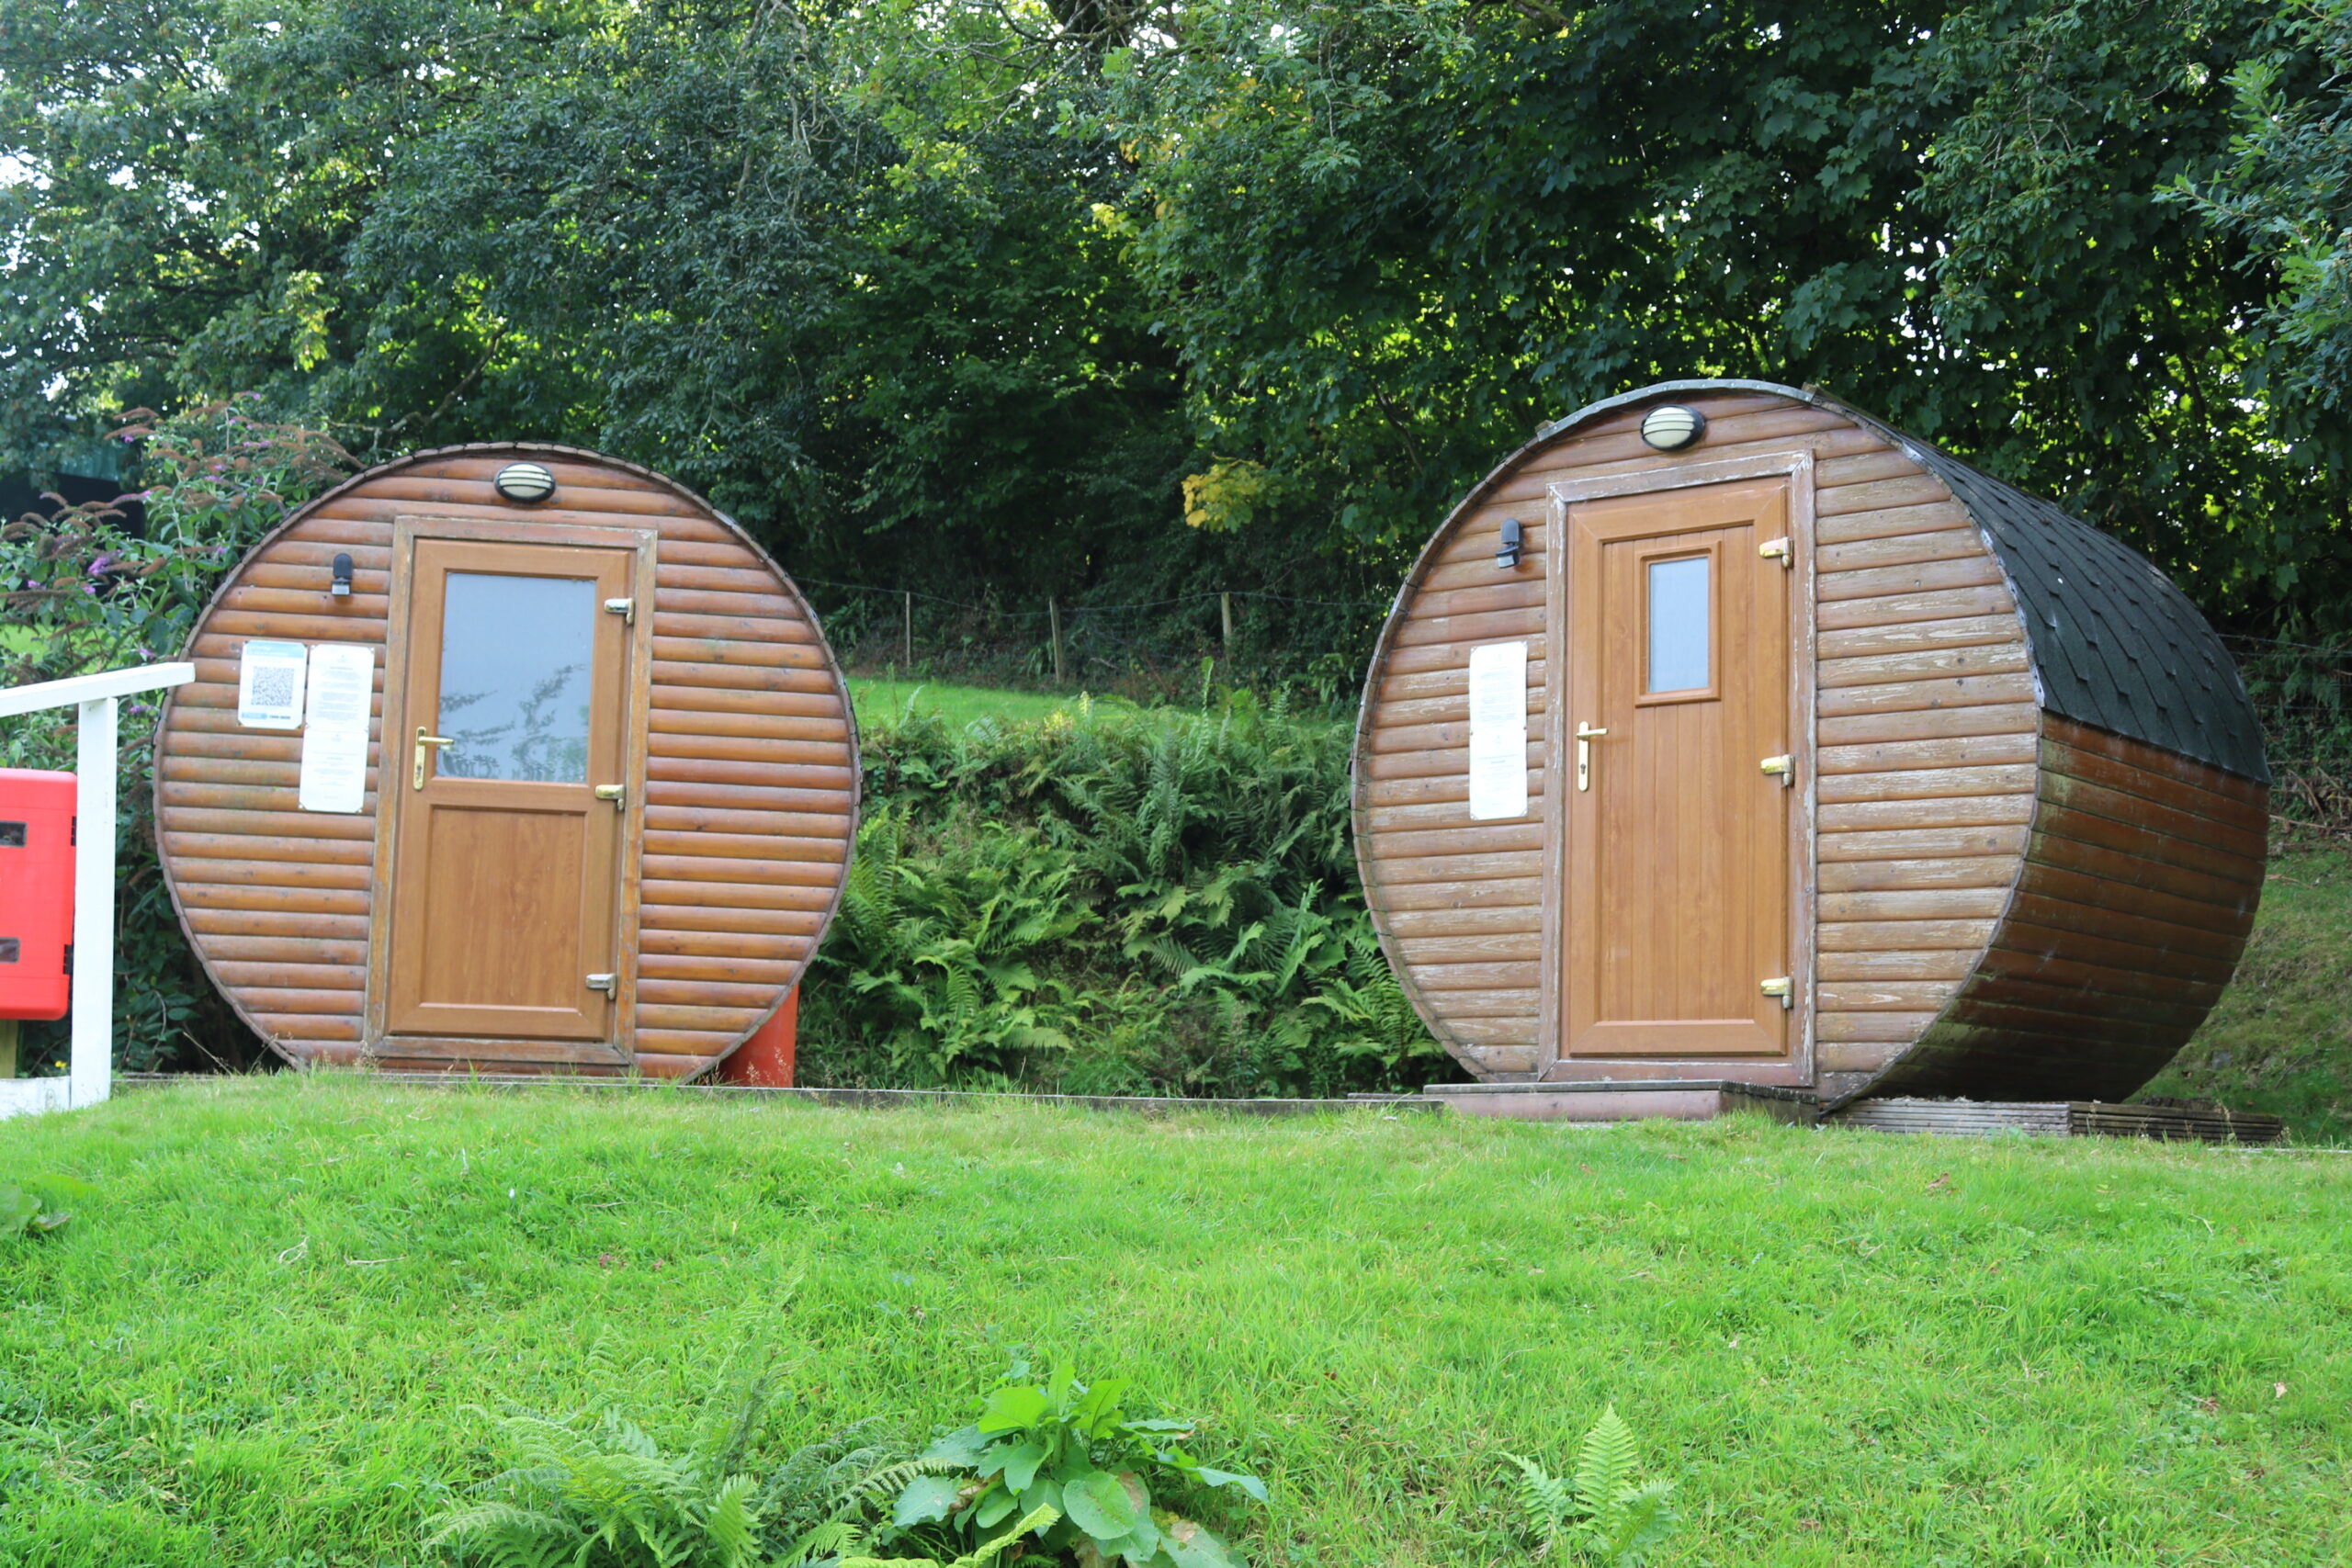 The hobbit huts house our toilet and shower